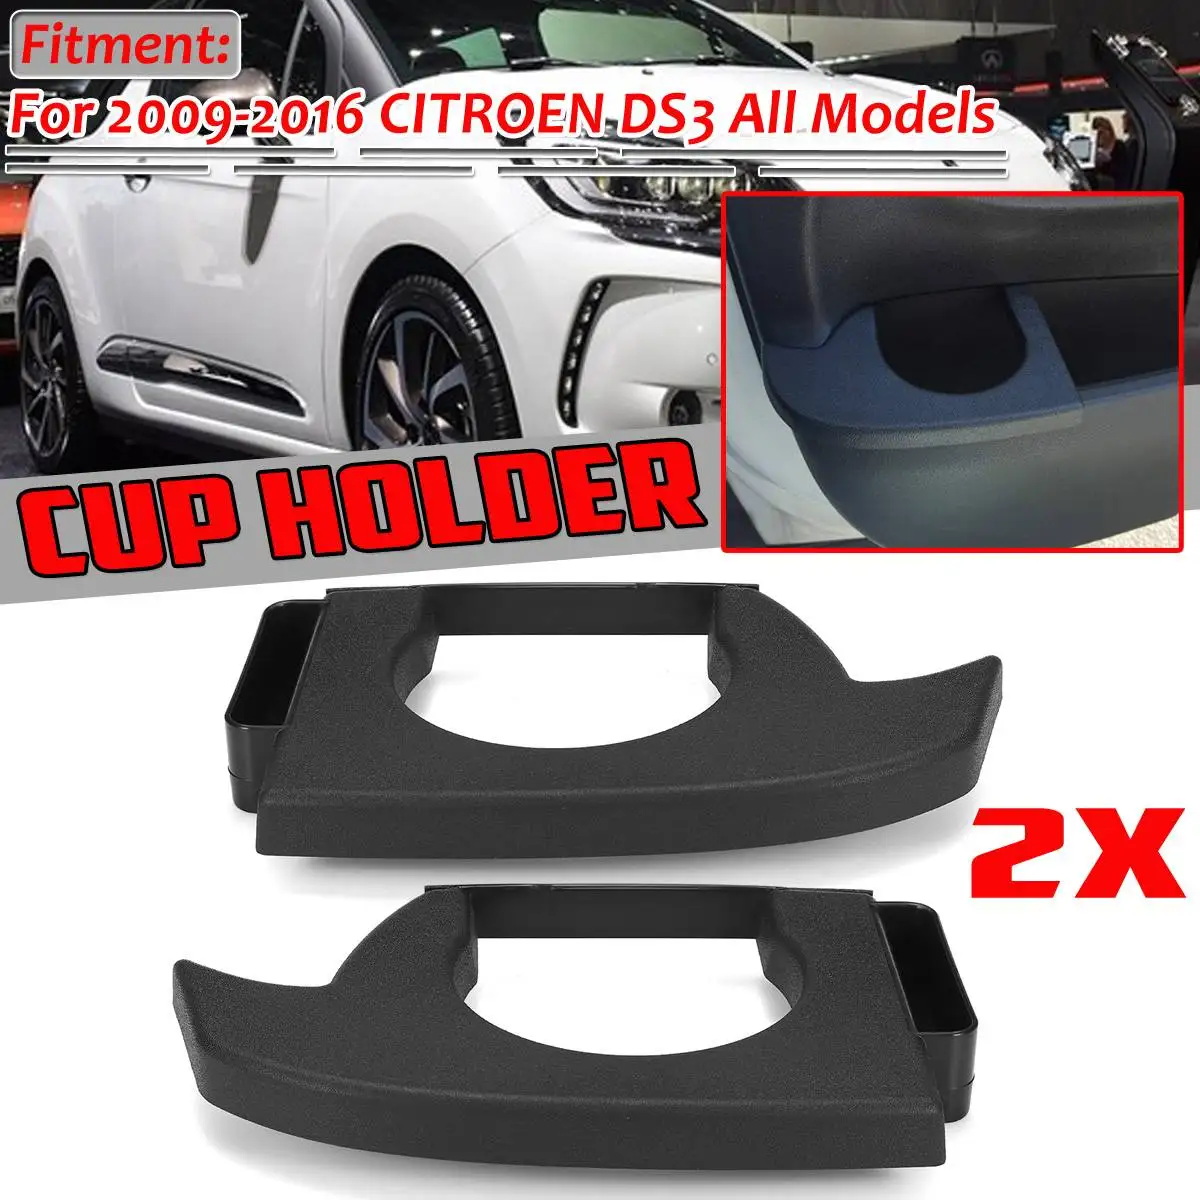 Left/Right ABS Car Side Door Cup Holder Car Cup Drink Holder Tray Storage Box Cover Trim For Citroen DS3 All Models 2009-2016